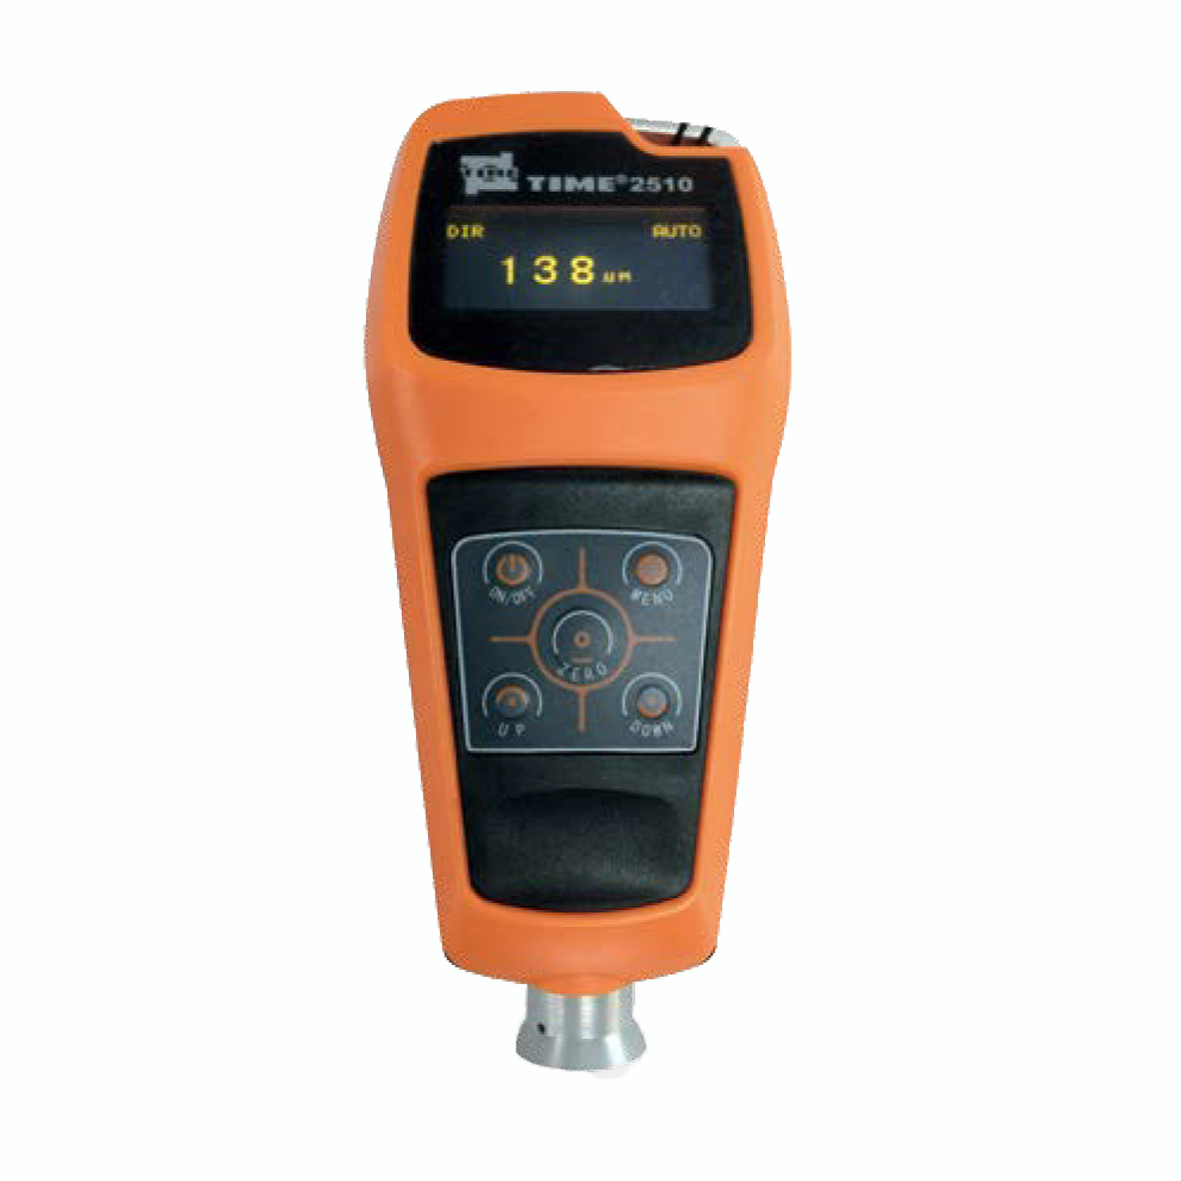 TIME®2510 Coating Thickness Gauge